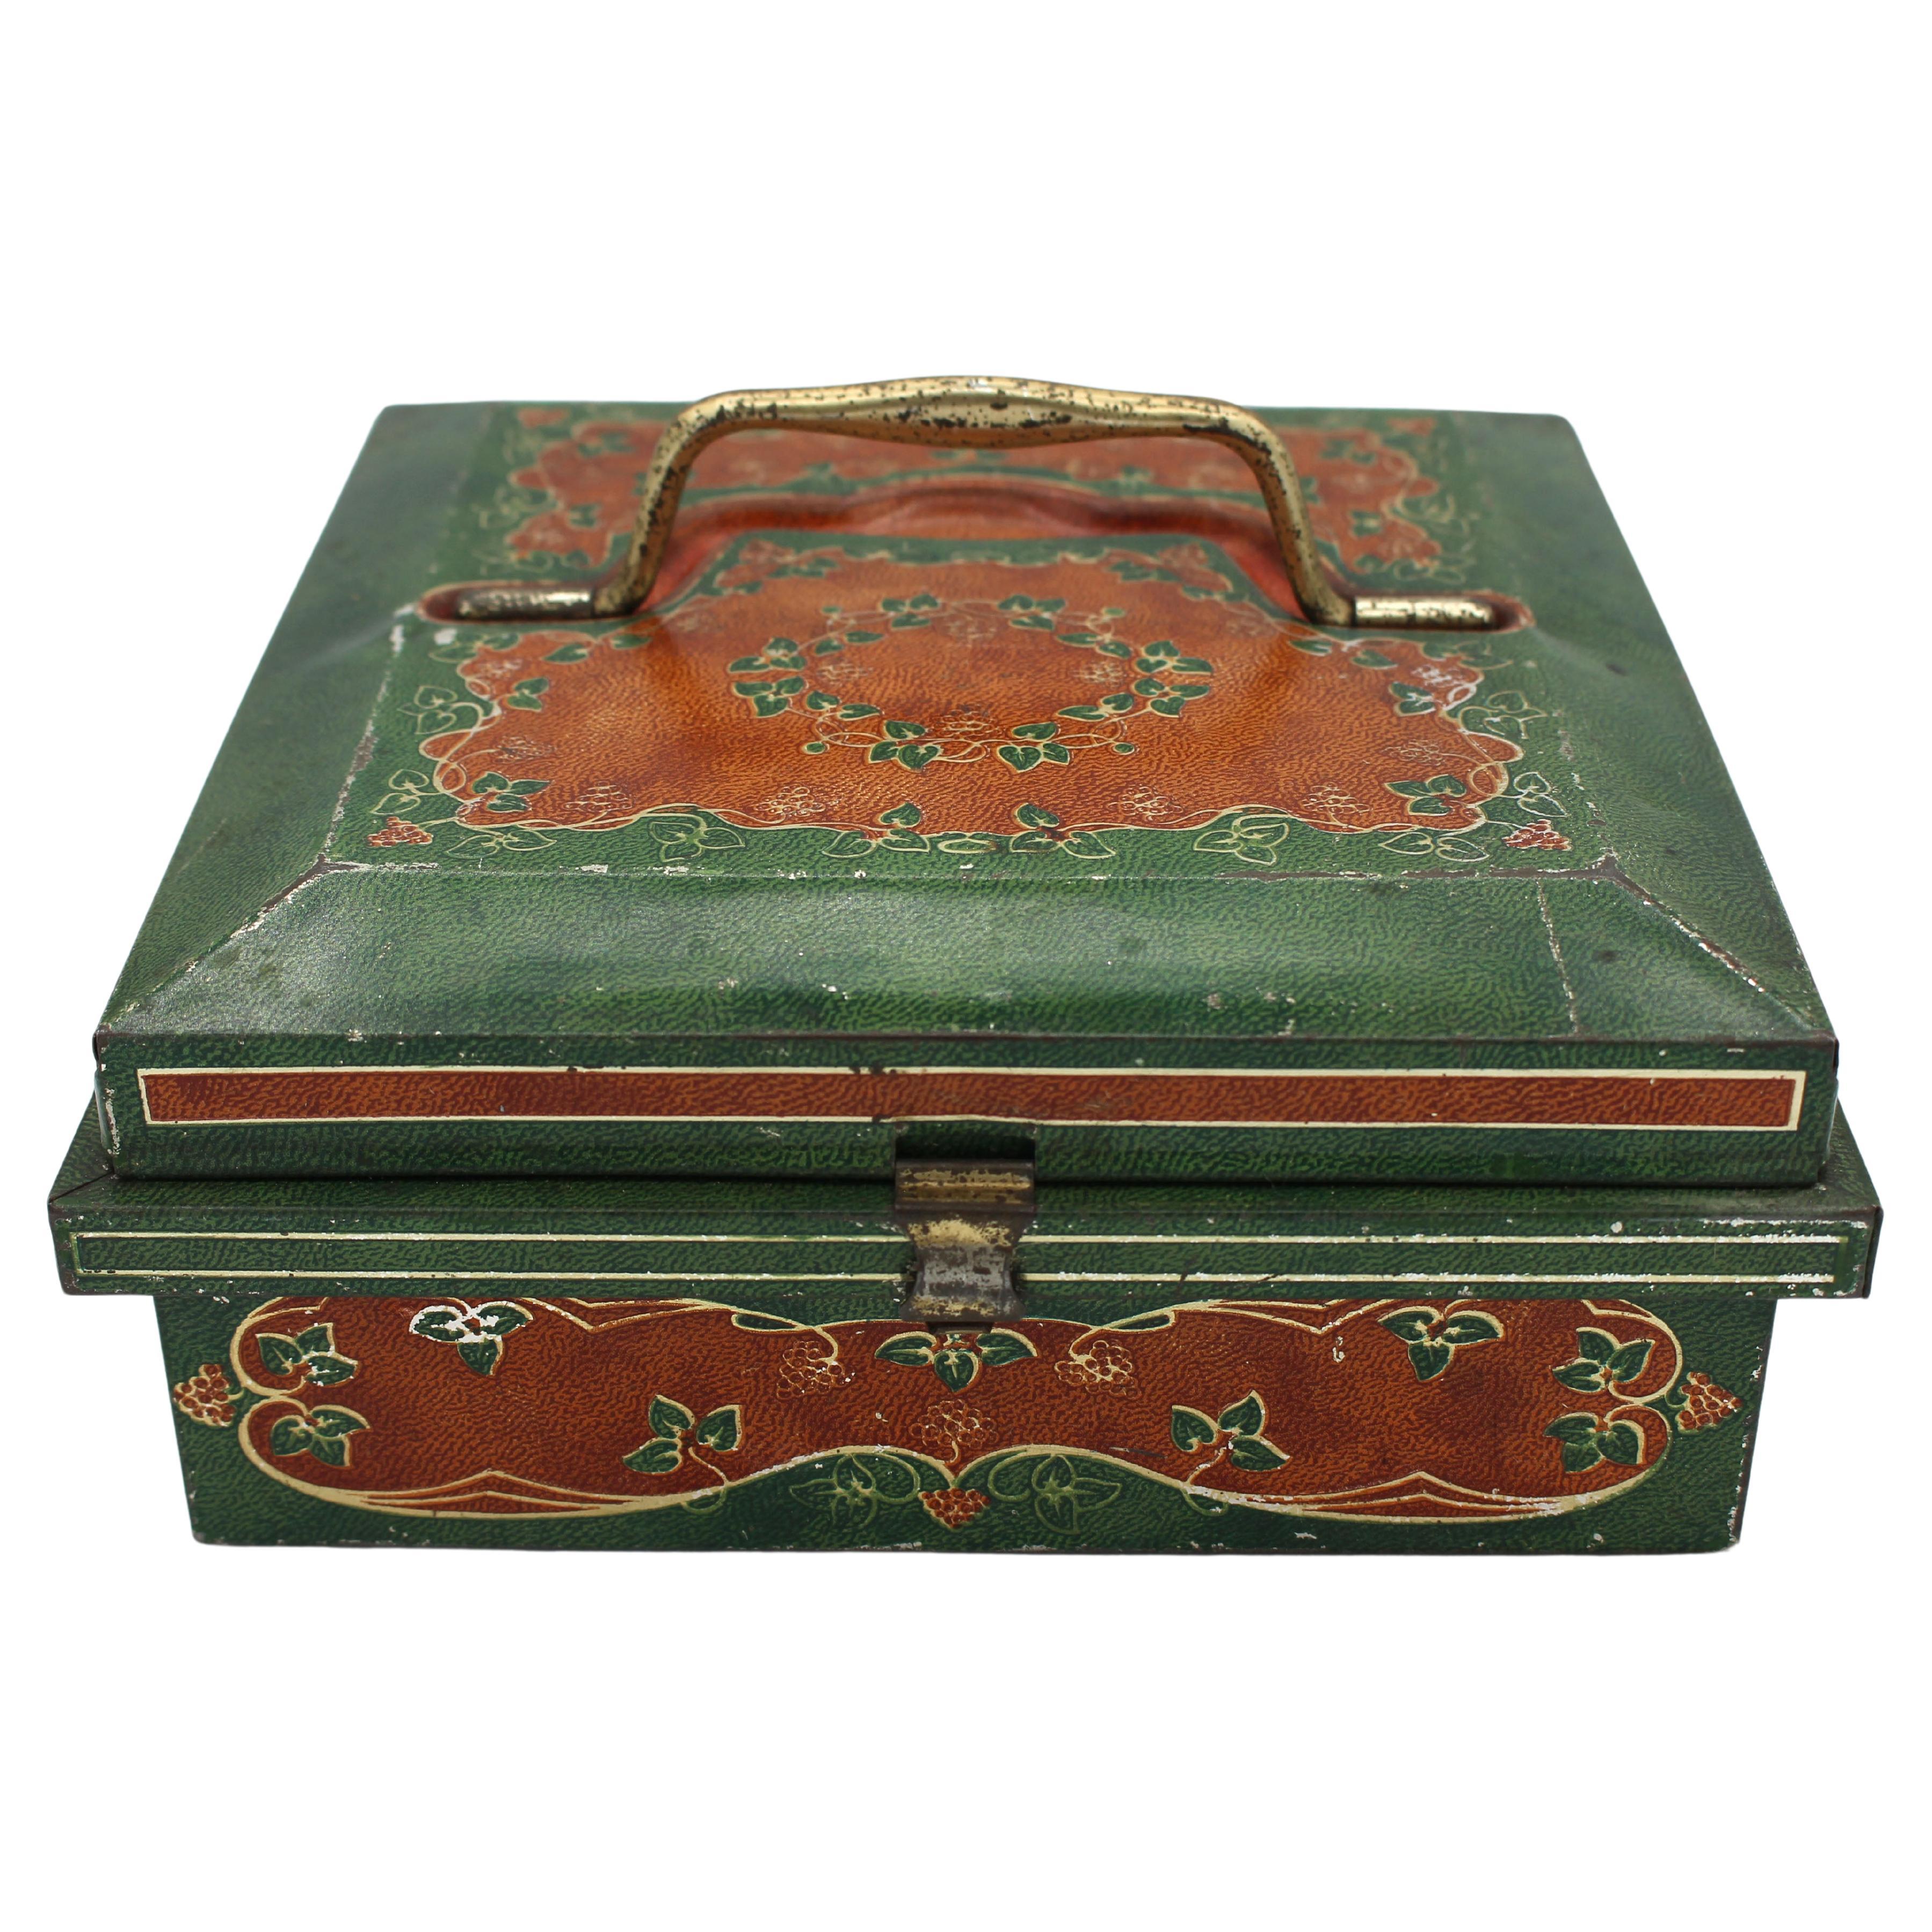 1903 Huntley & Palmers Jewelry Casket Form Biscuit Tin Box For Sale